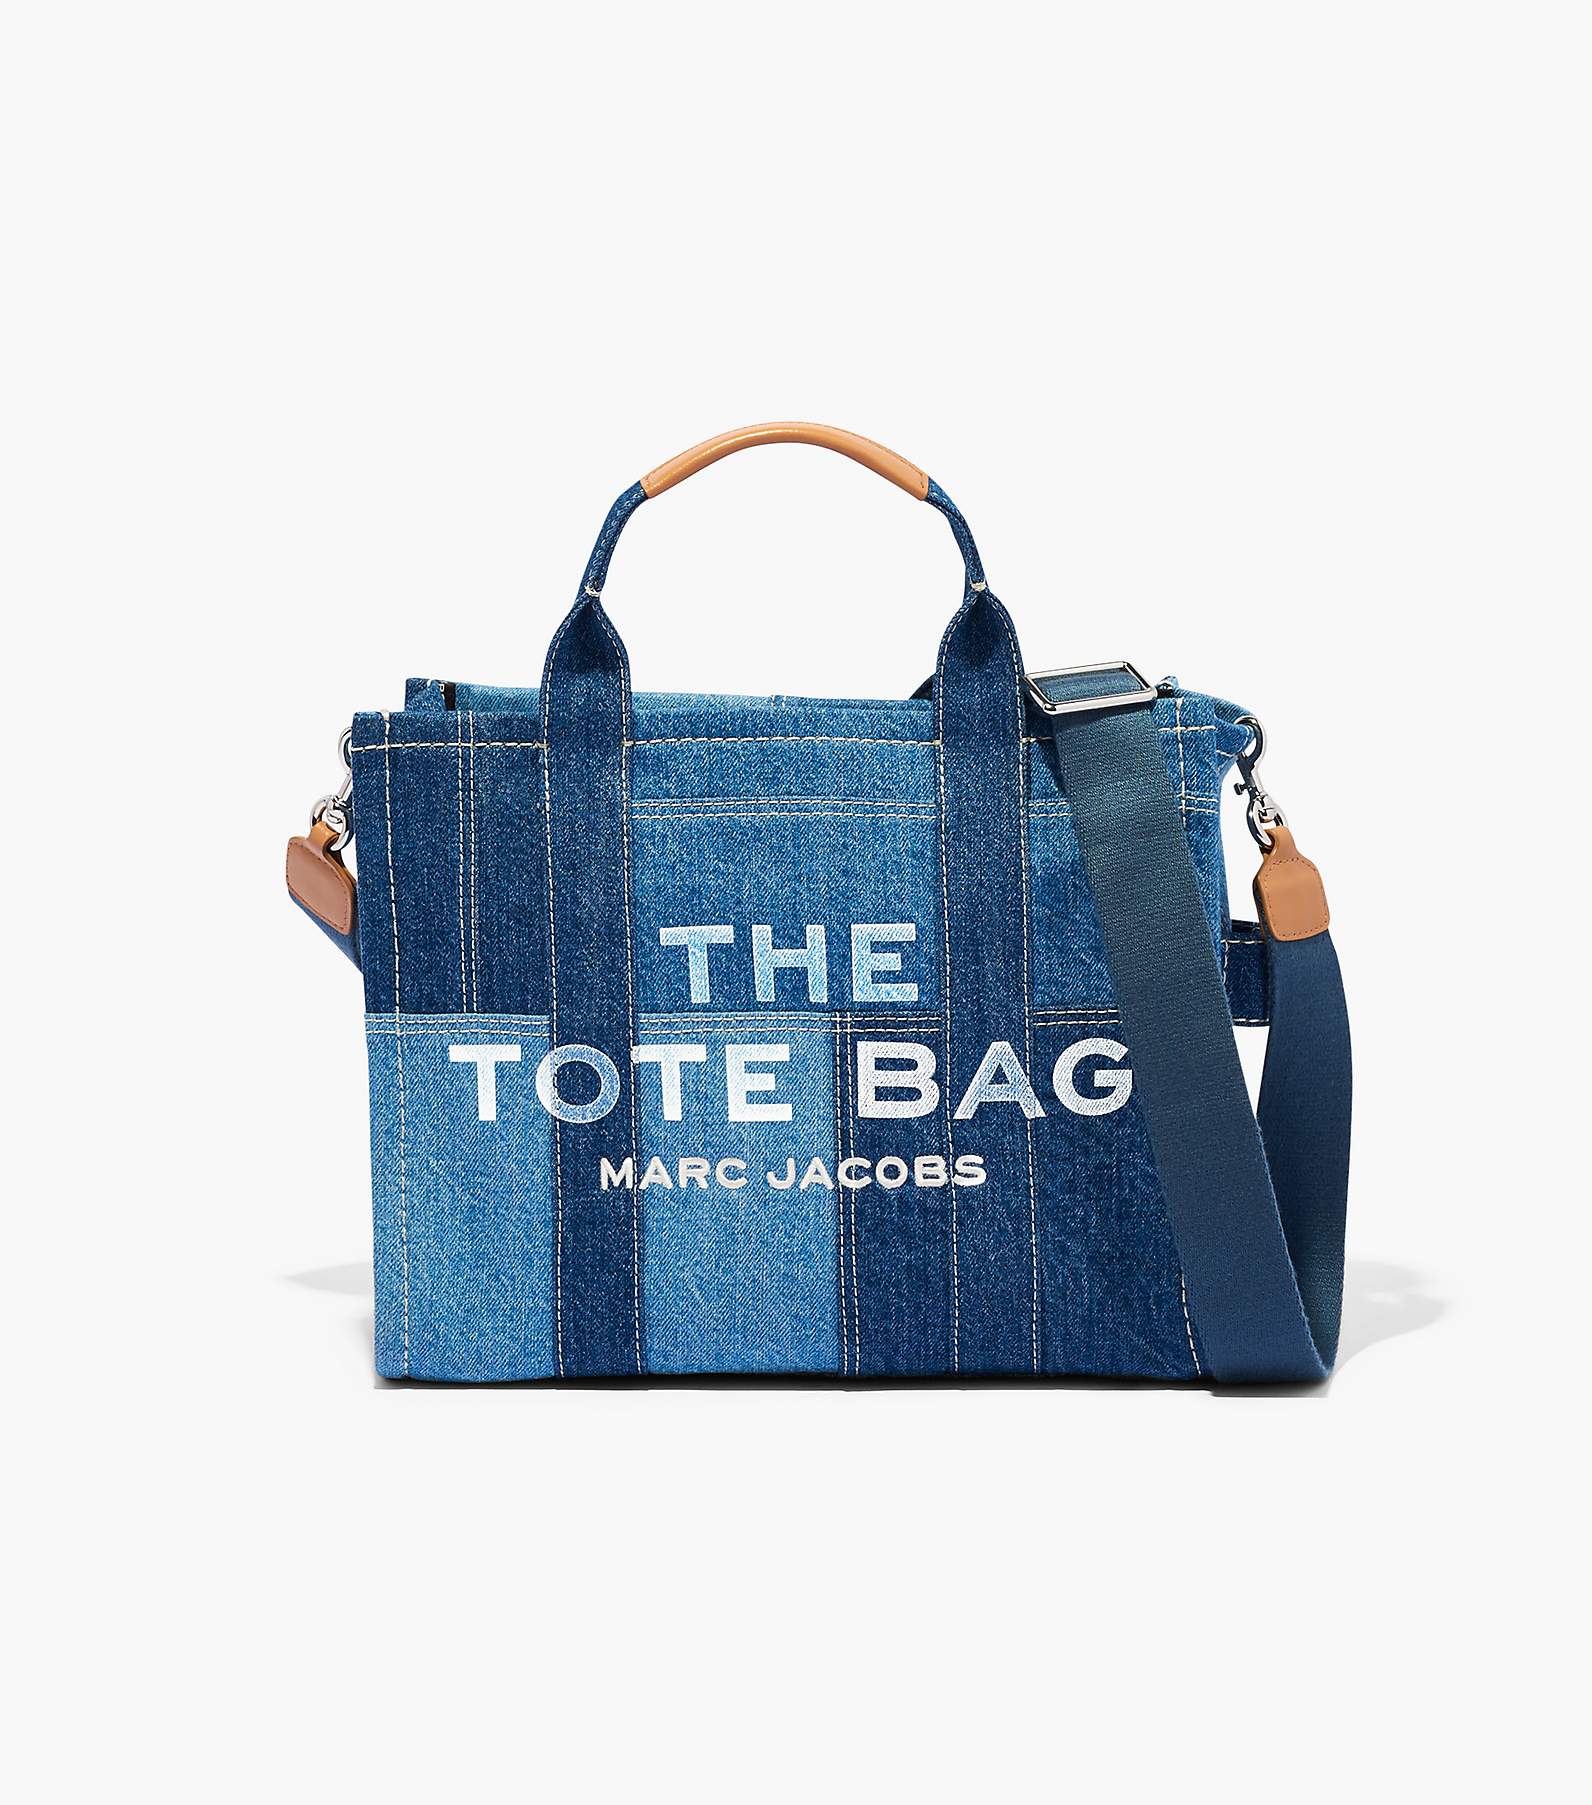 marc jacobs tote bag sizes